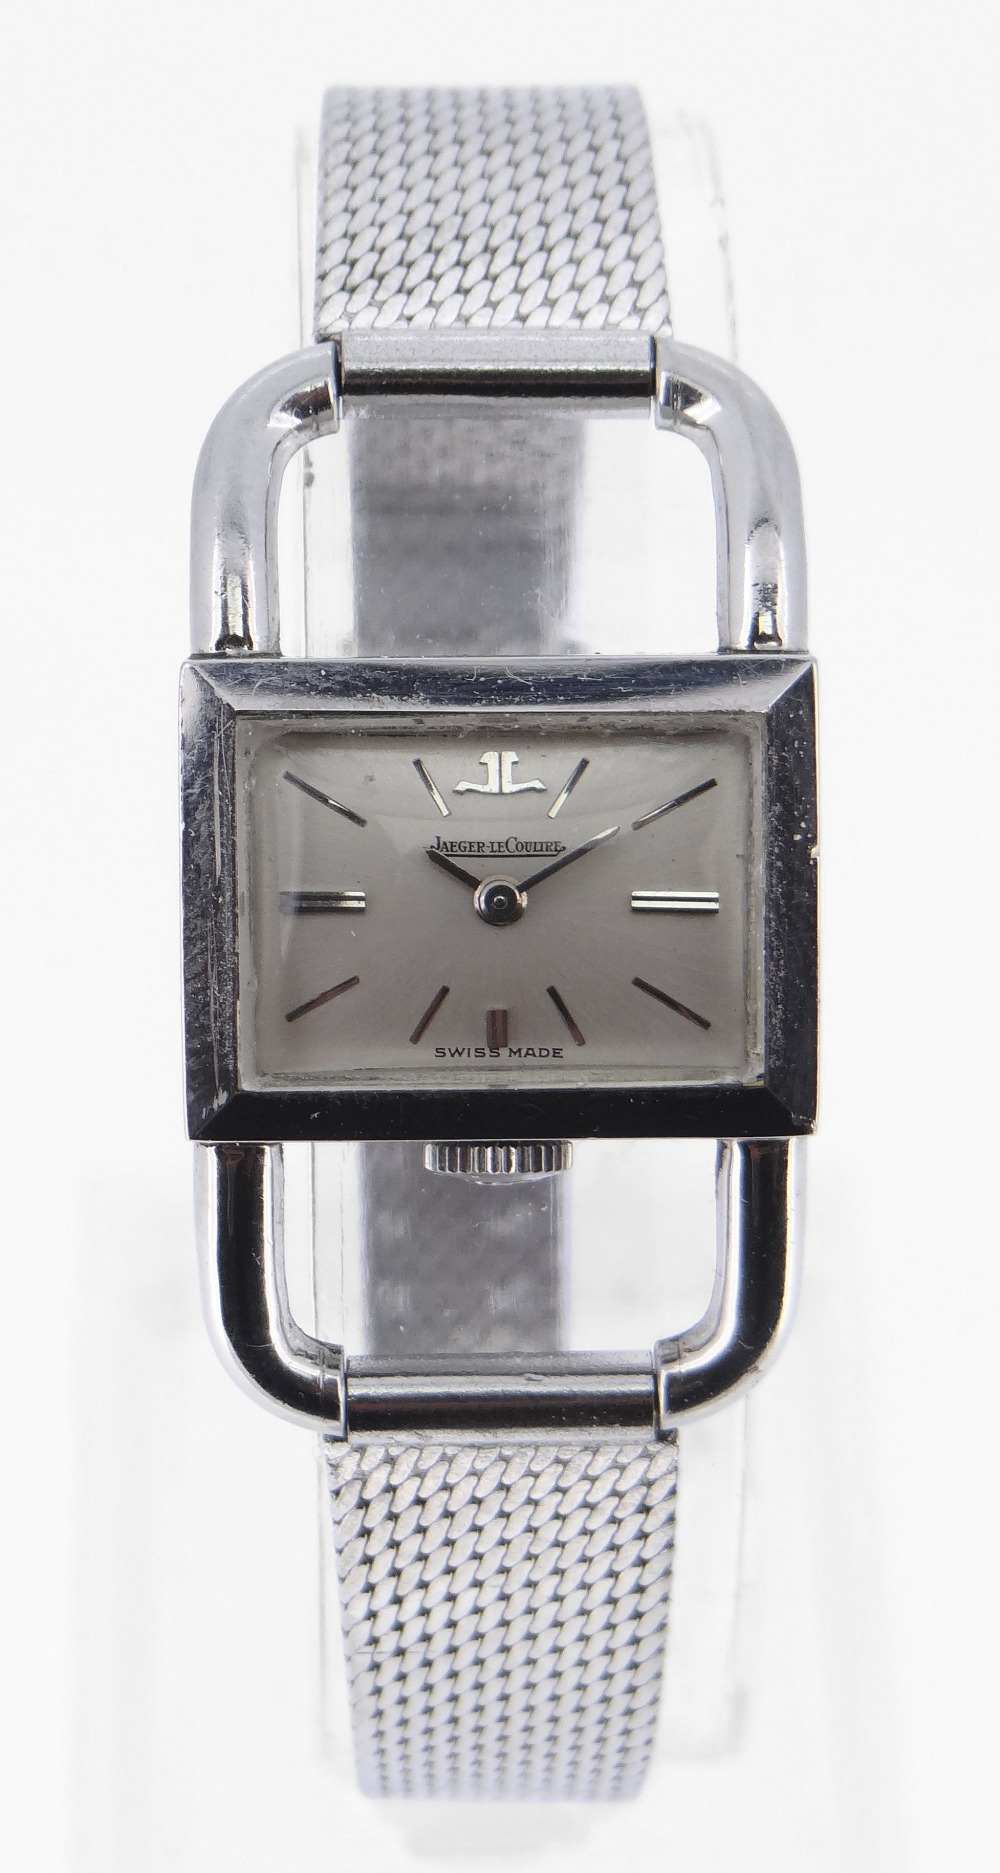 JAEGER LECOULTRE STAINLESS STEEL LADIES’ WRISTWATCH, c. 1965 - Image 4 of 6